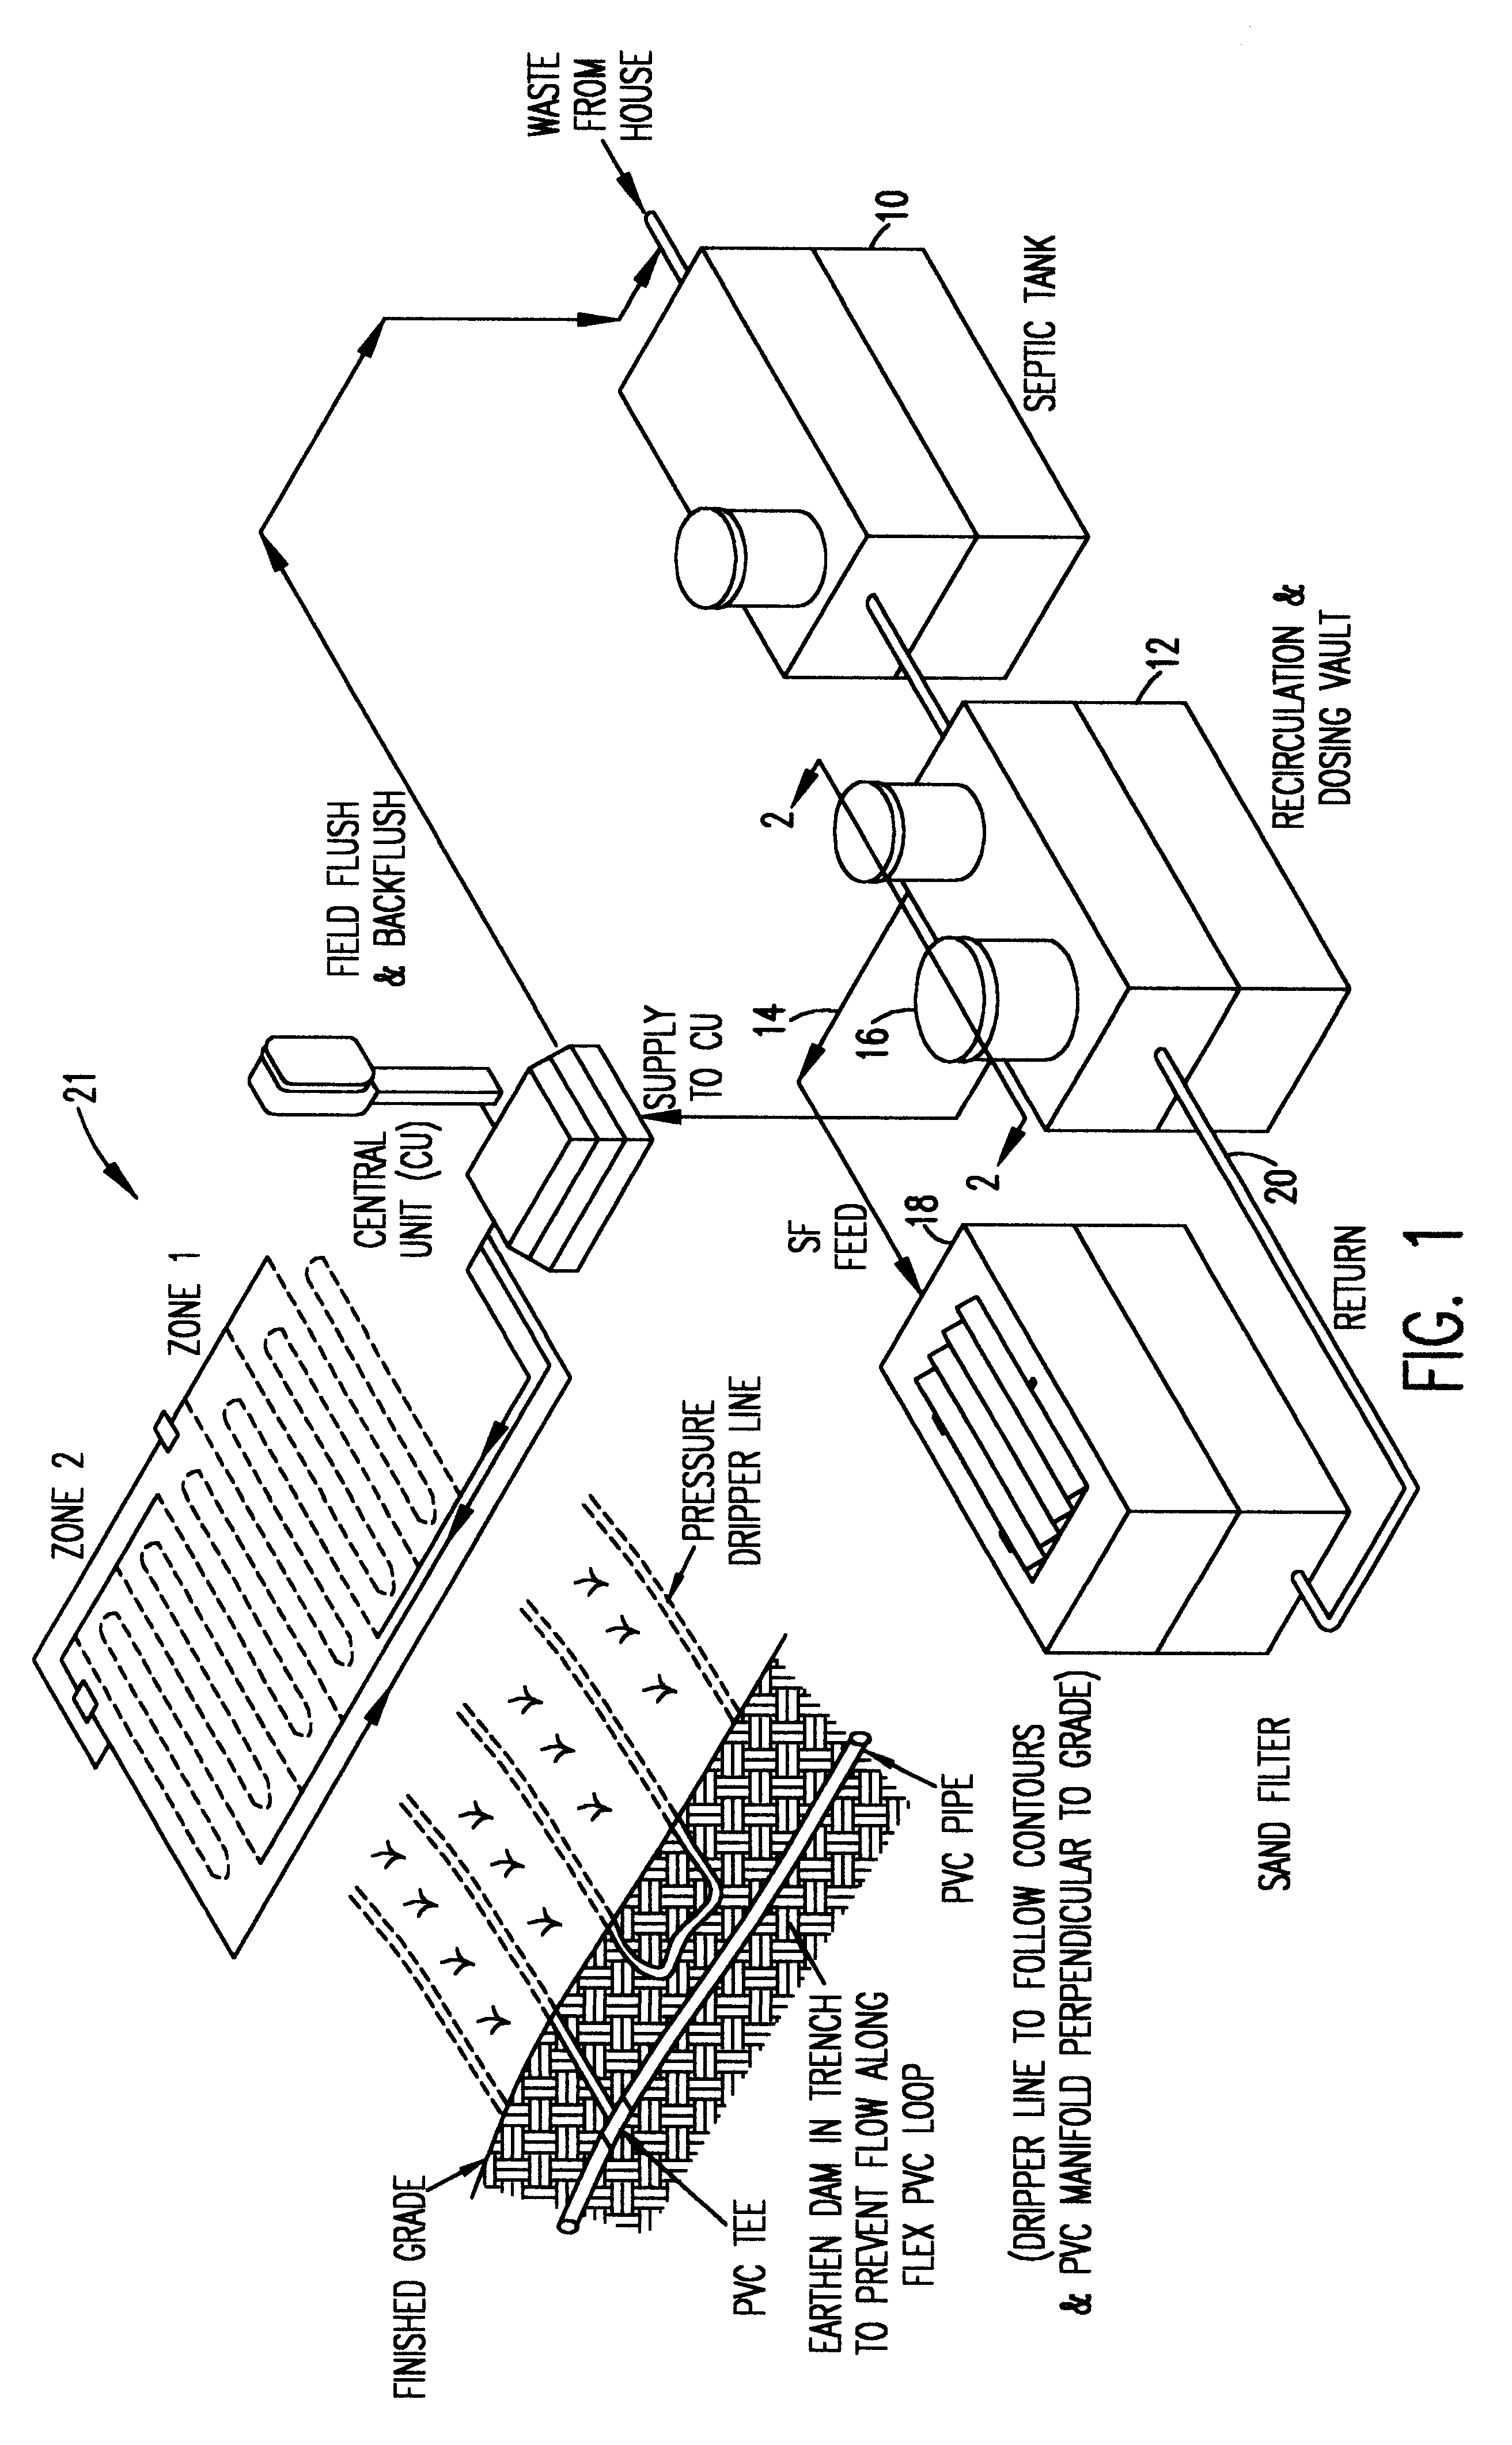 Filtration and subsurface distribution system